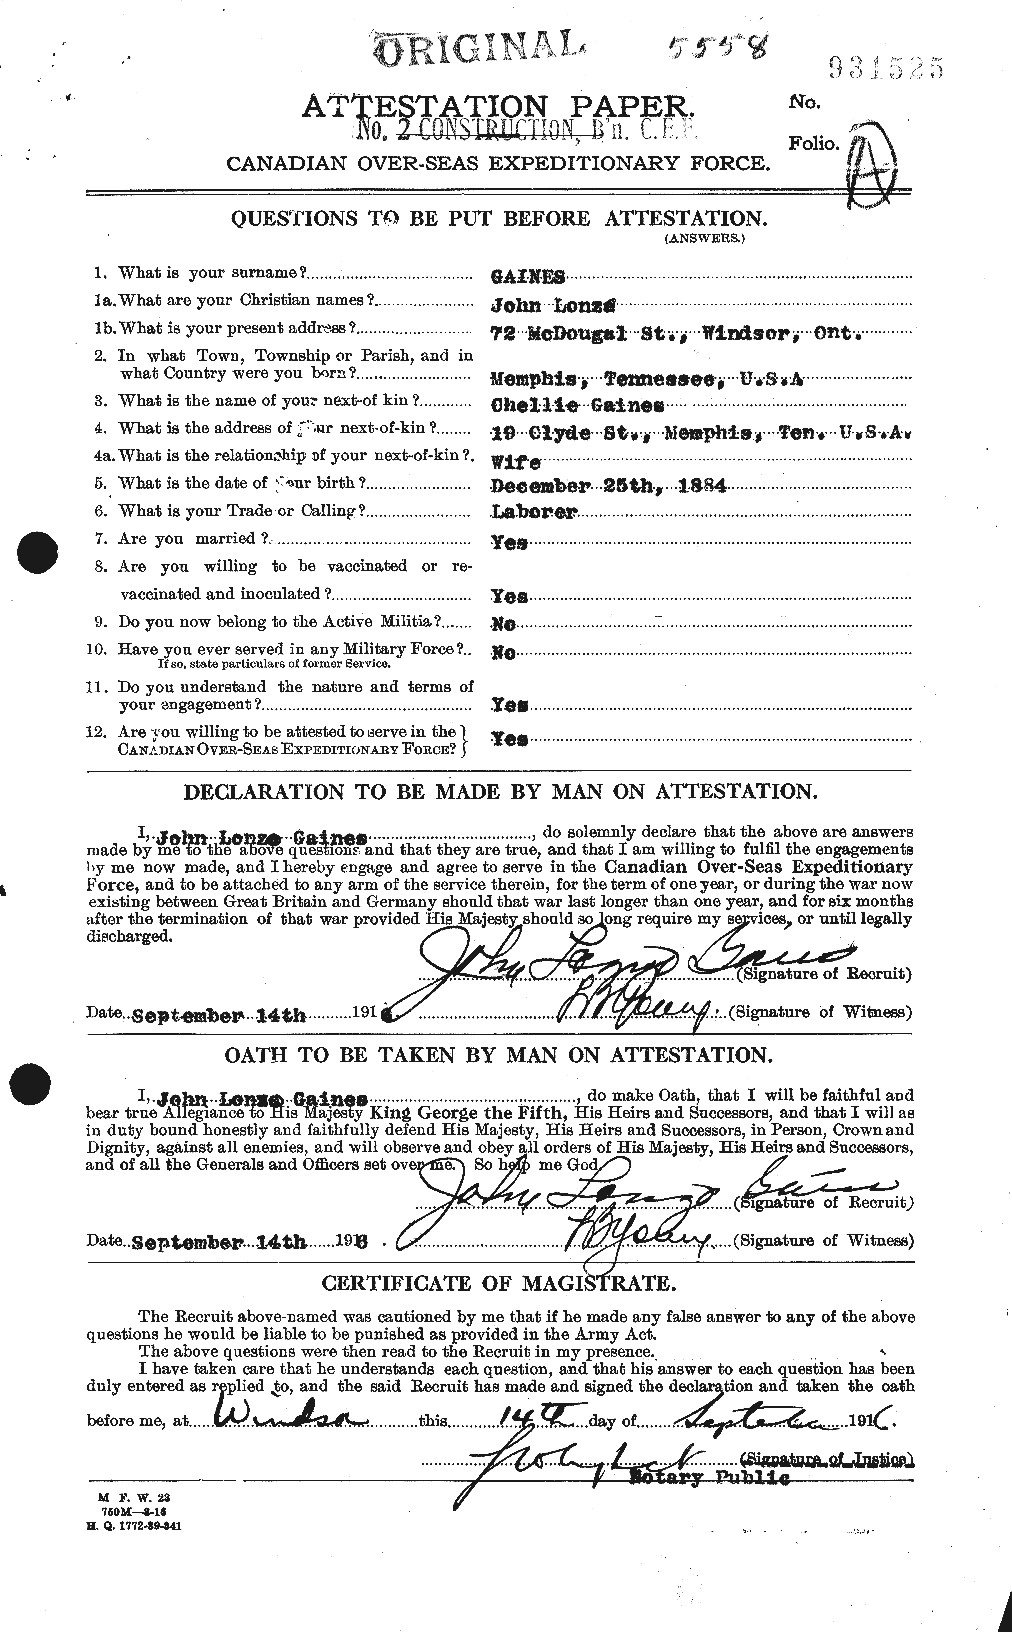 Personnel Records of the First World War - CEF 341079a